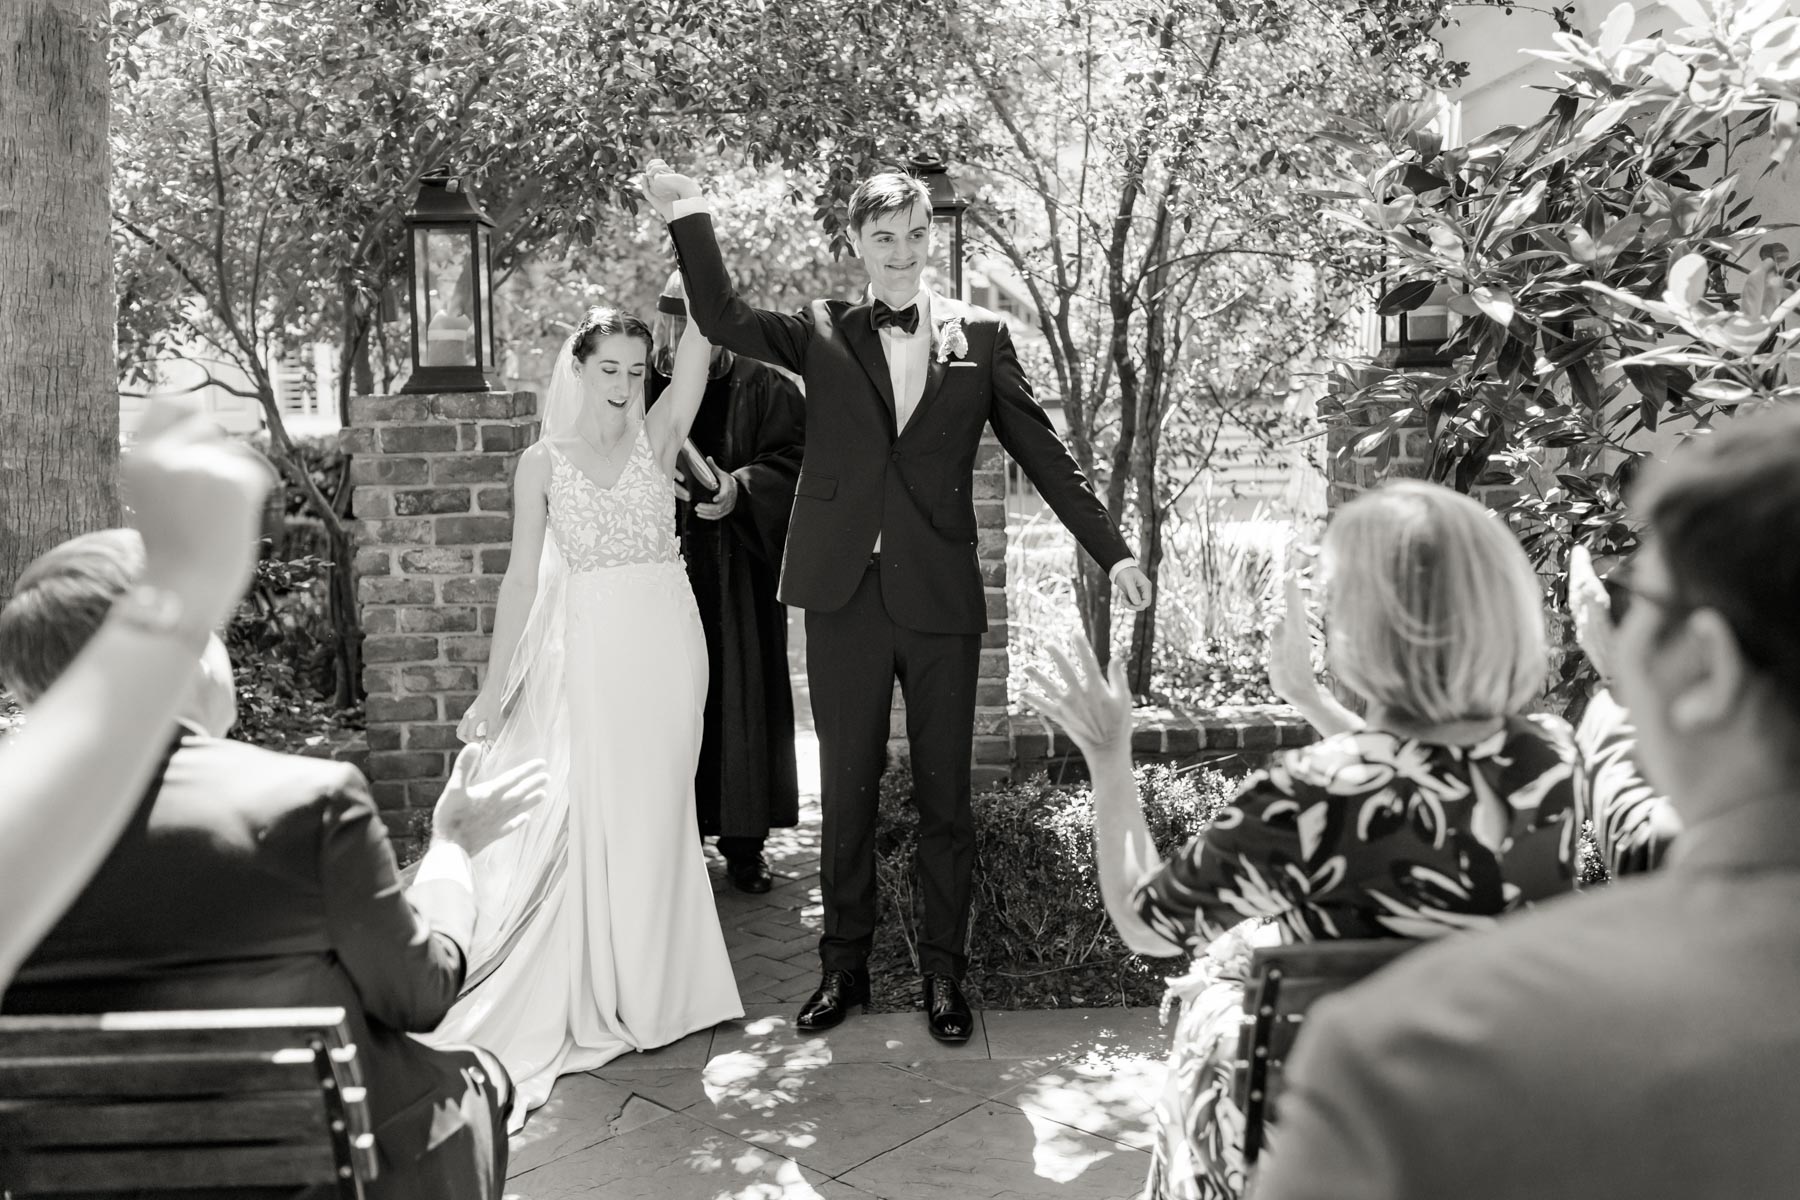 A bride and groom hold their hands up in celebration before they walk down the aisle as husband and wife